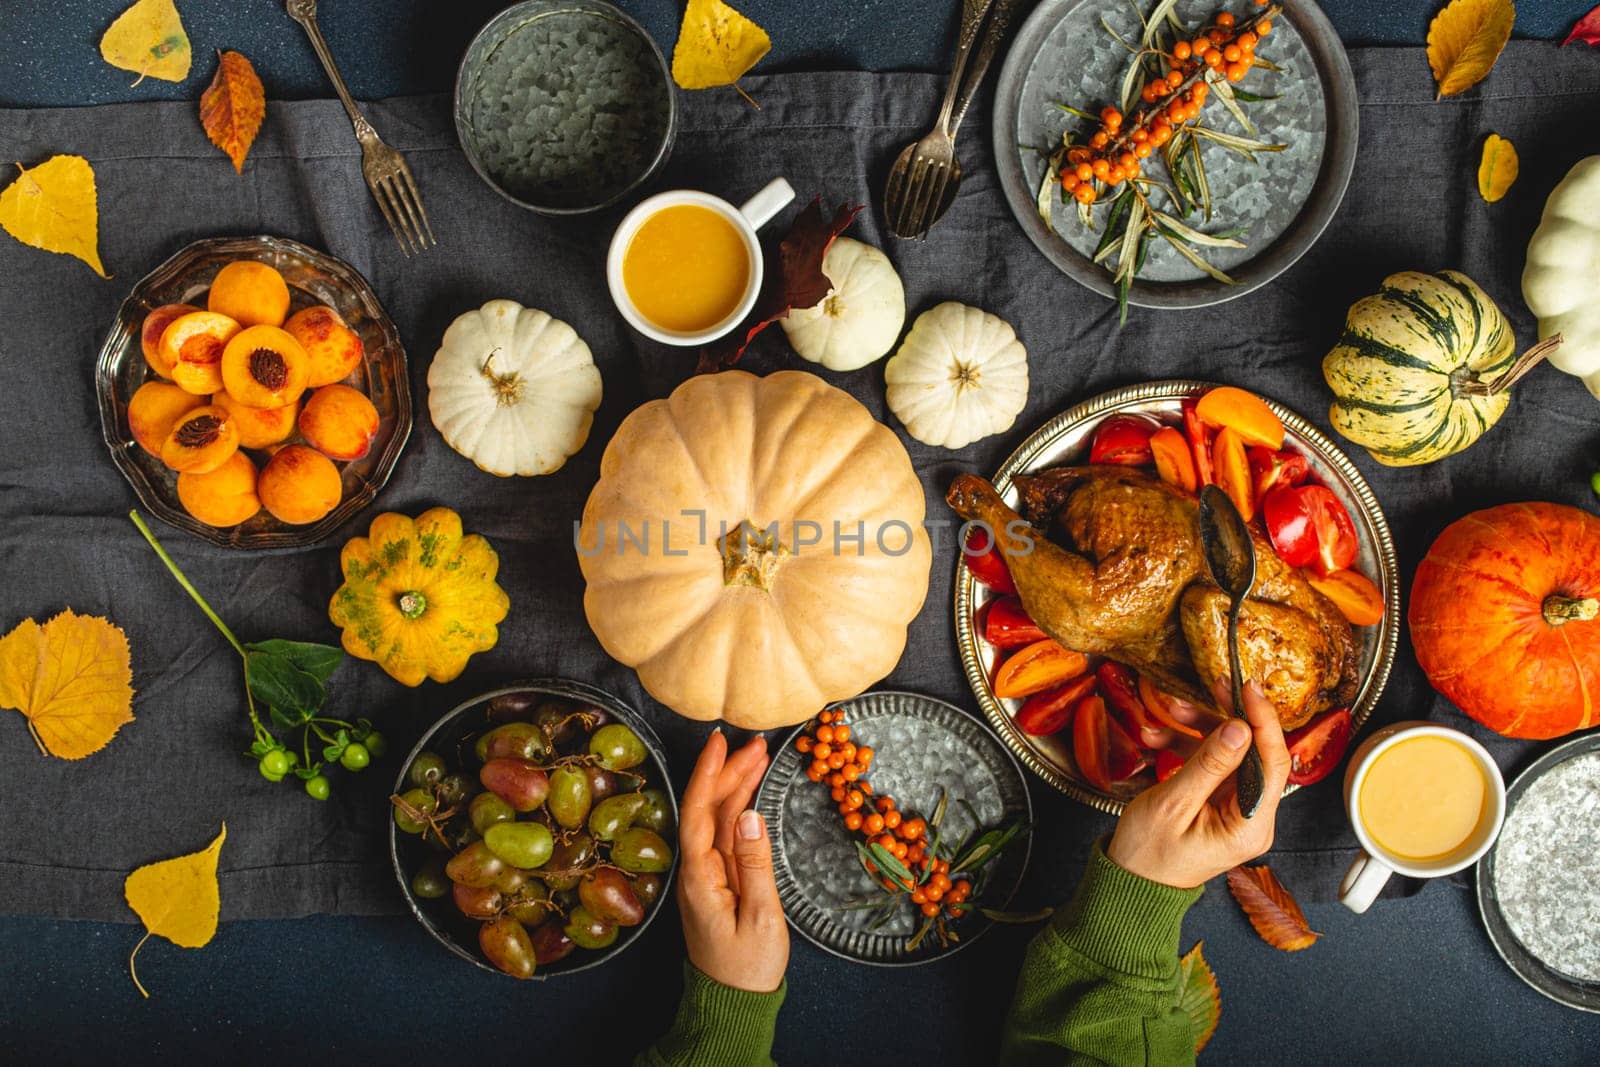 Thanksgiving festive table composition with roasted turkey, pumpkins, vegetable salad, fruit, orange beverage. Thanksgiving celebration dinner with traditional autumn meals on rustic dark table.